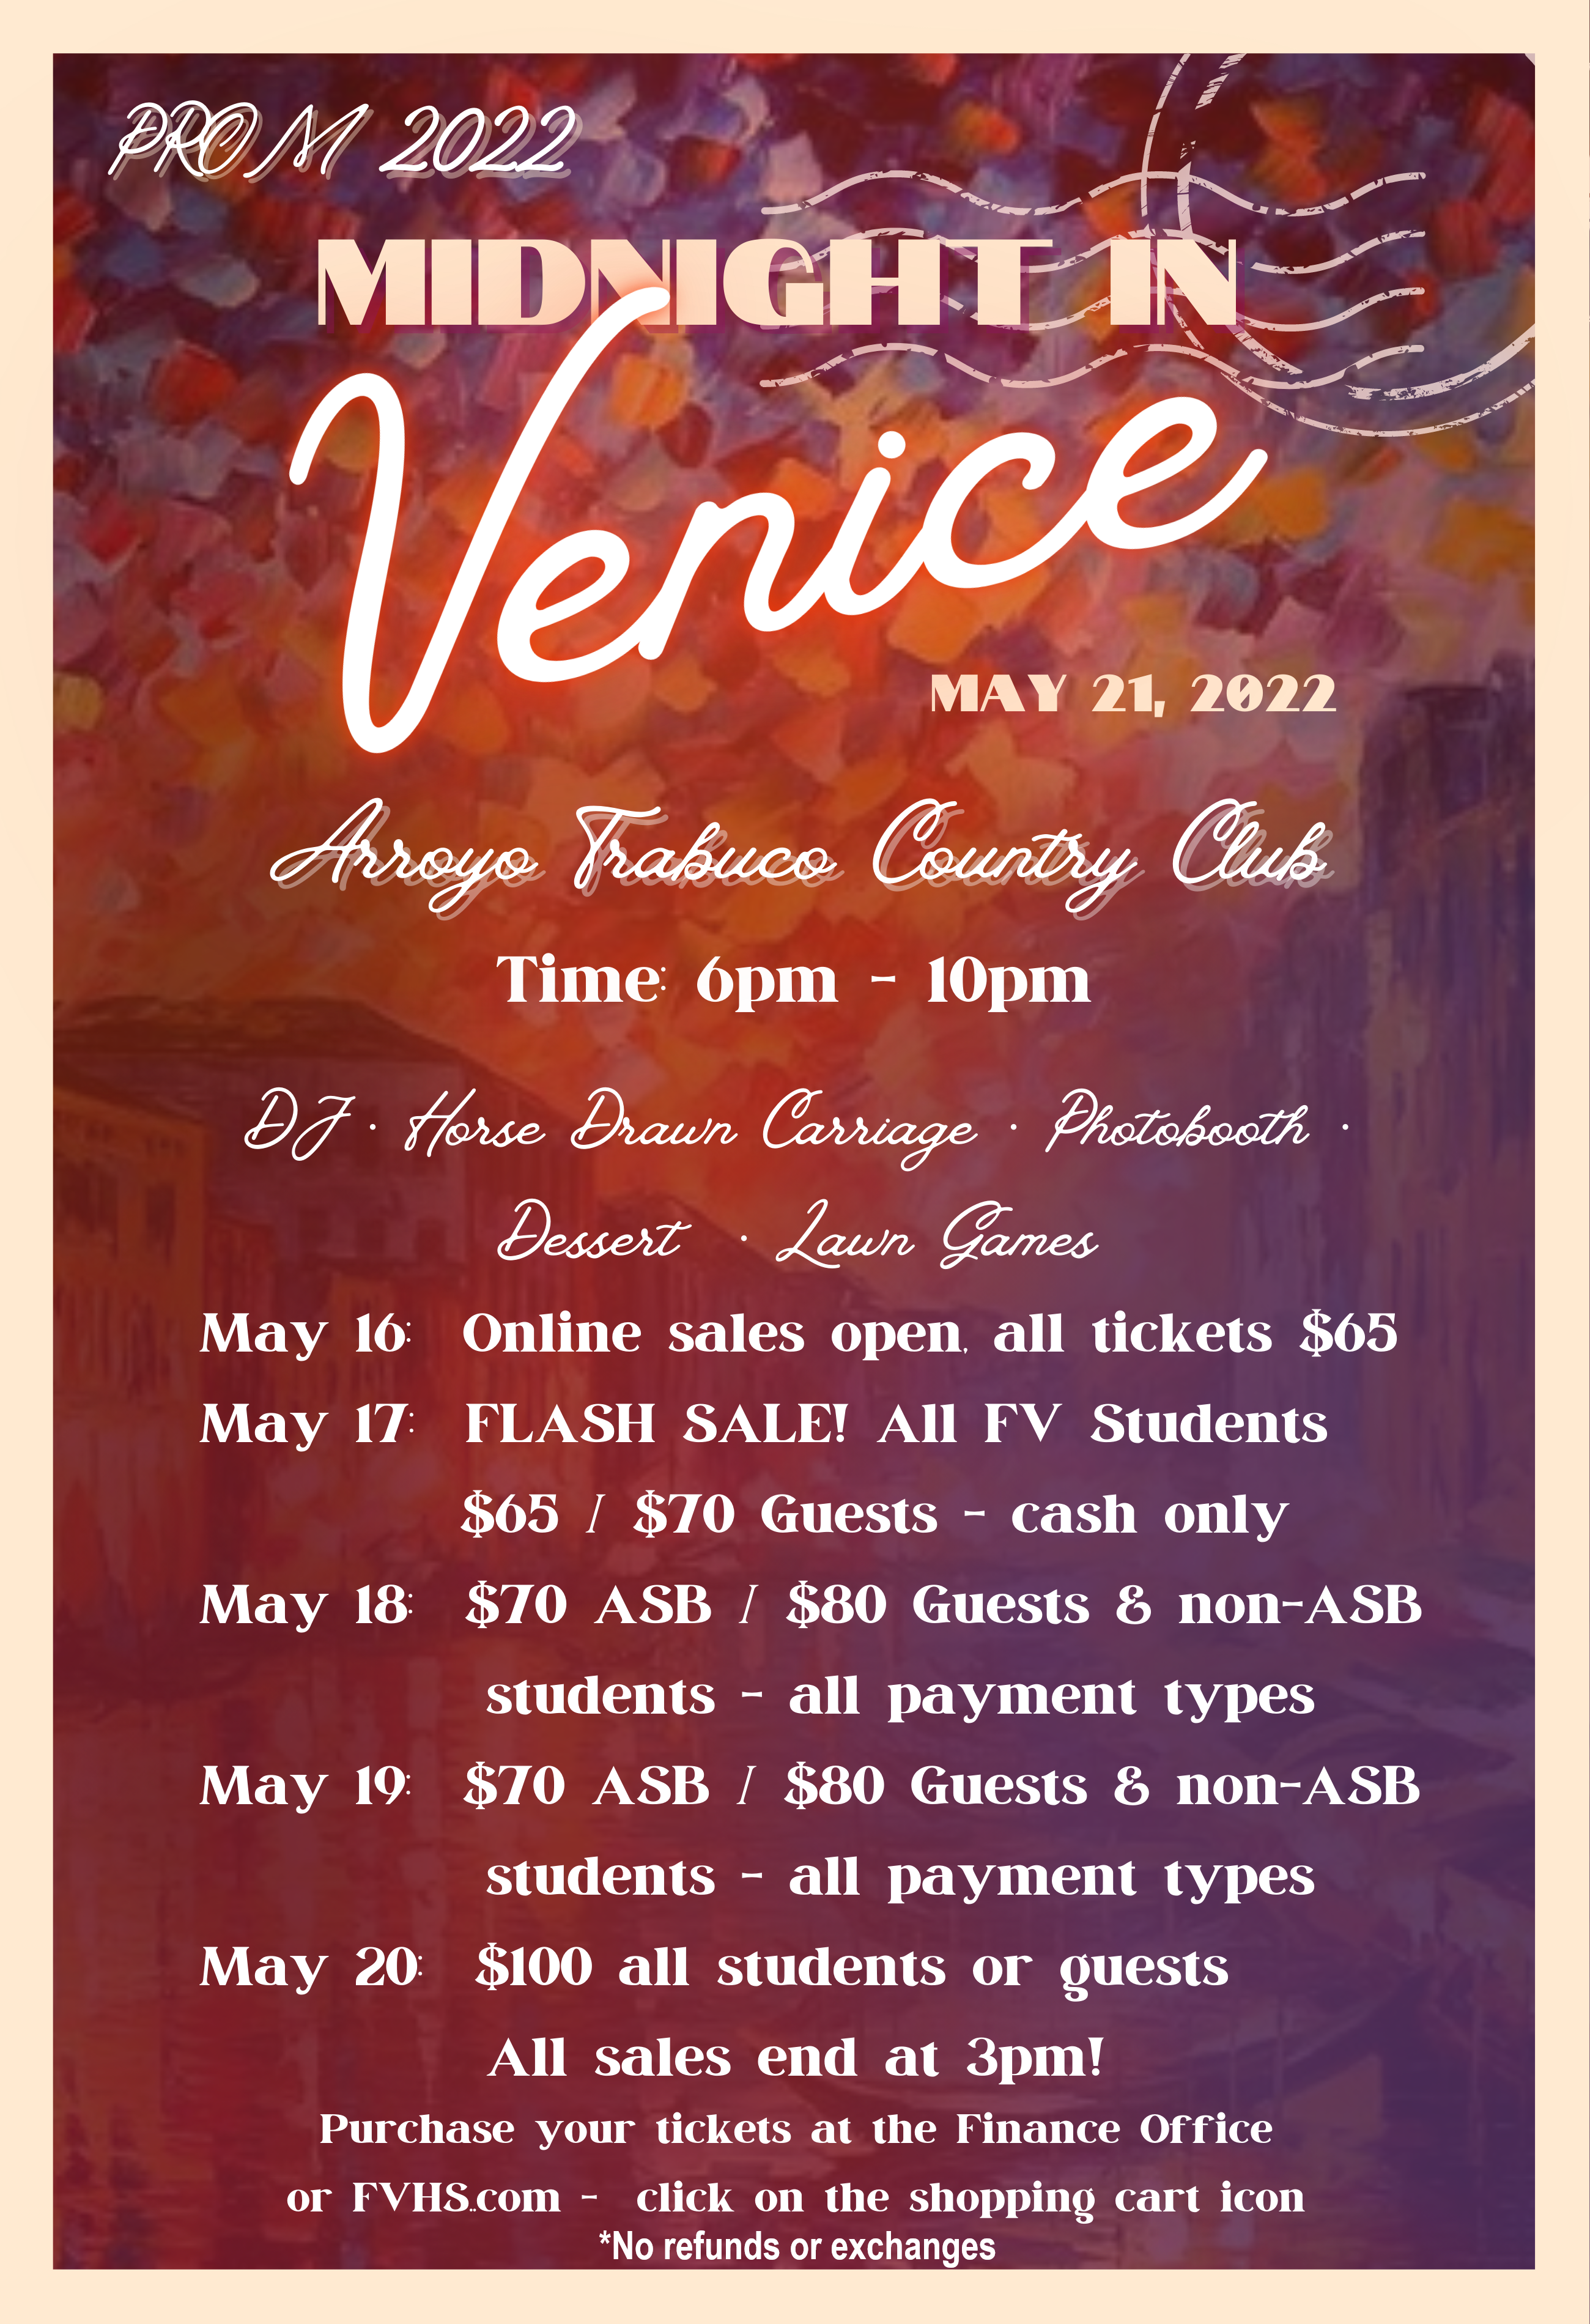 Tickets from prom go on sale May 16th for our May 21st event.